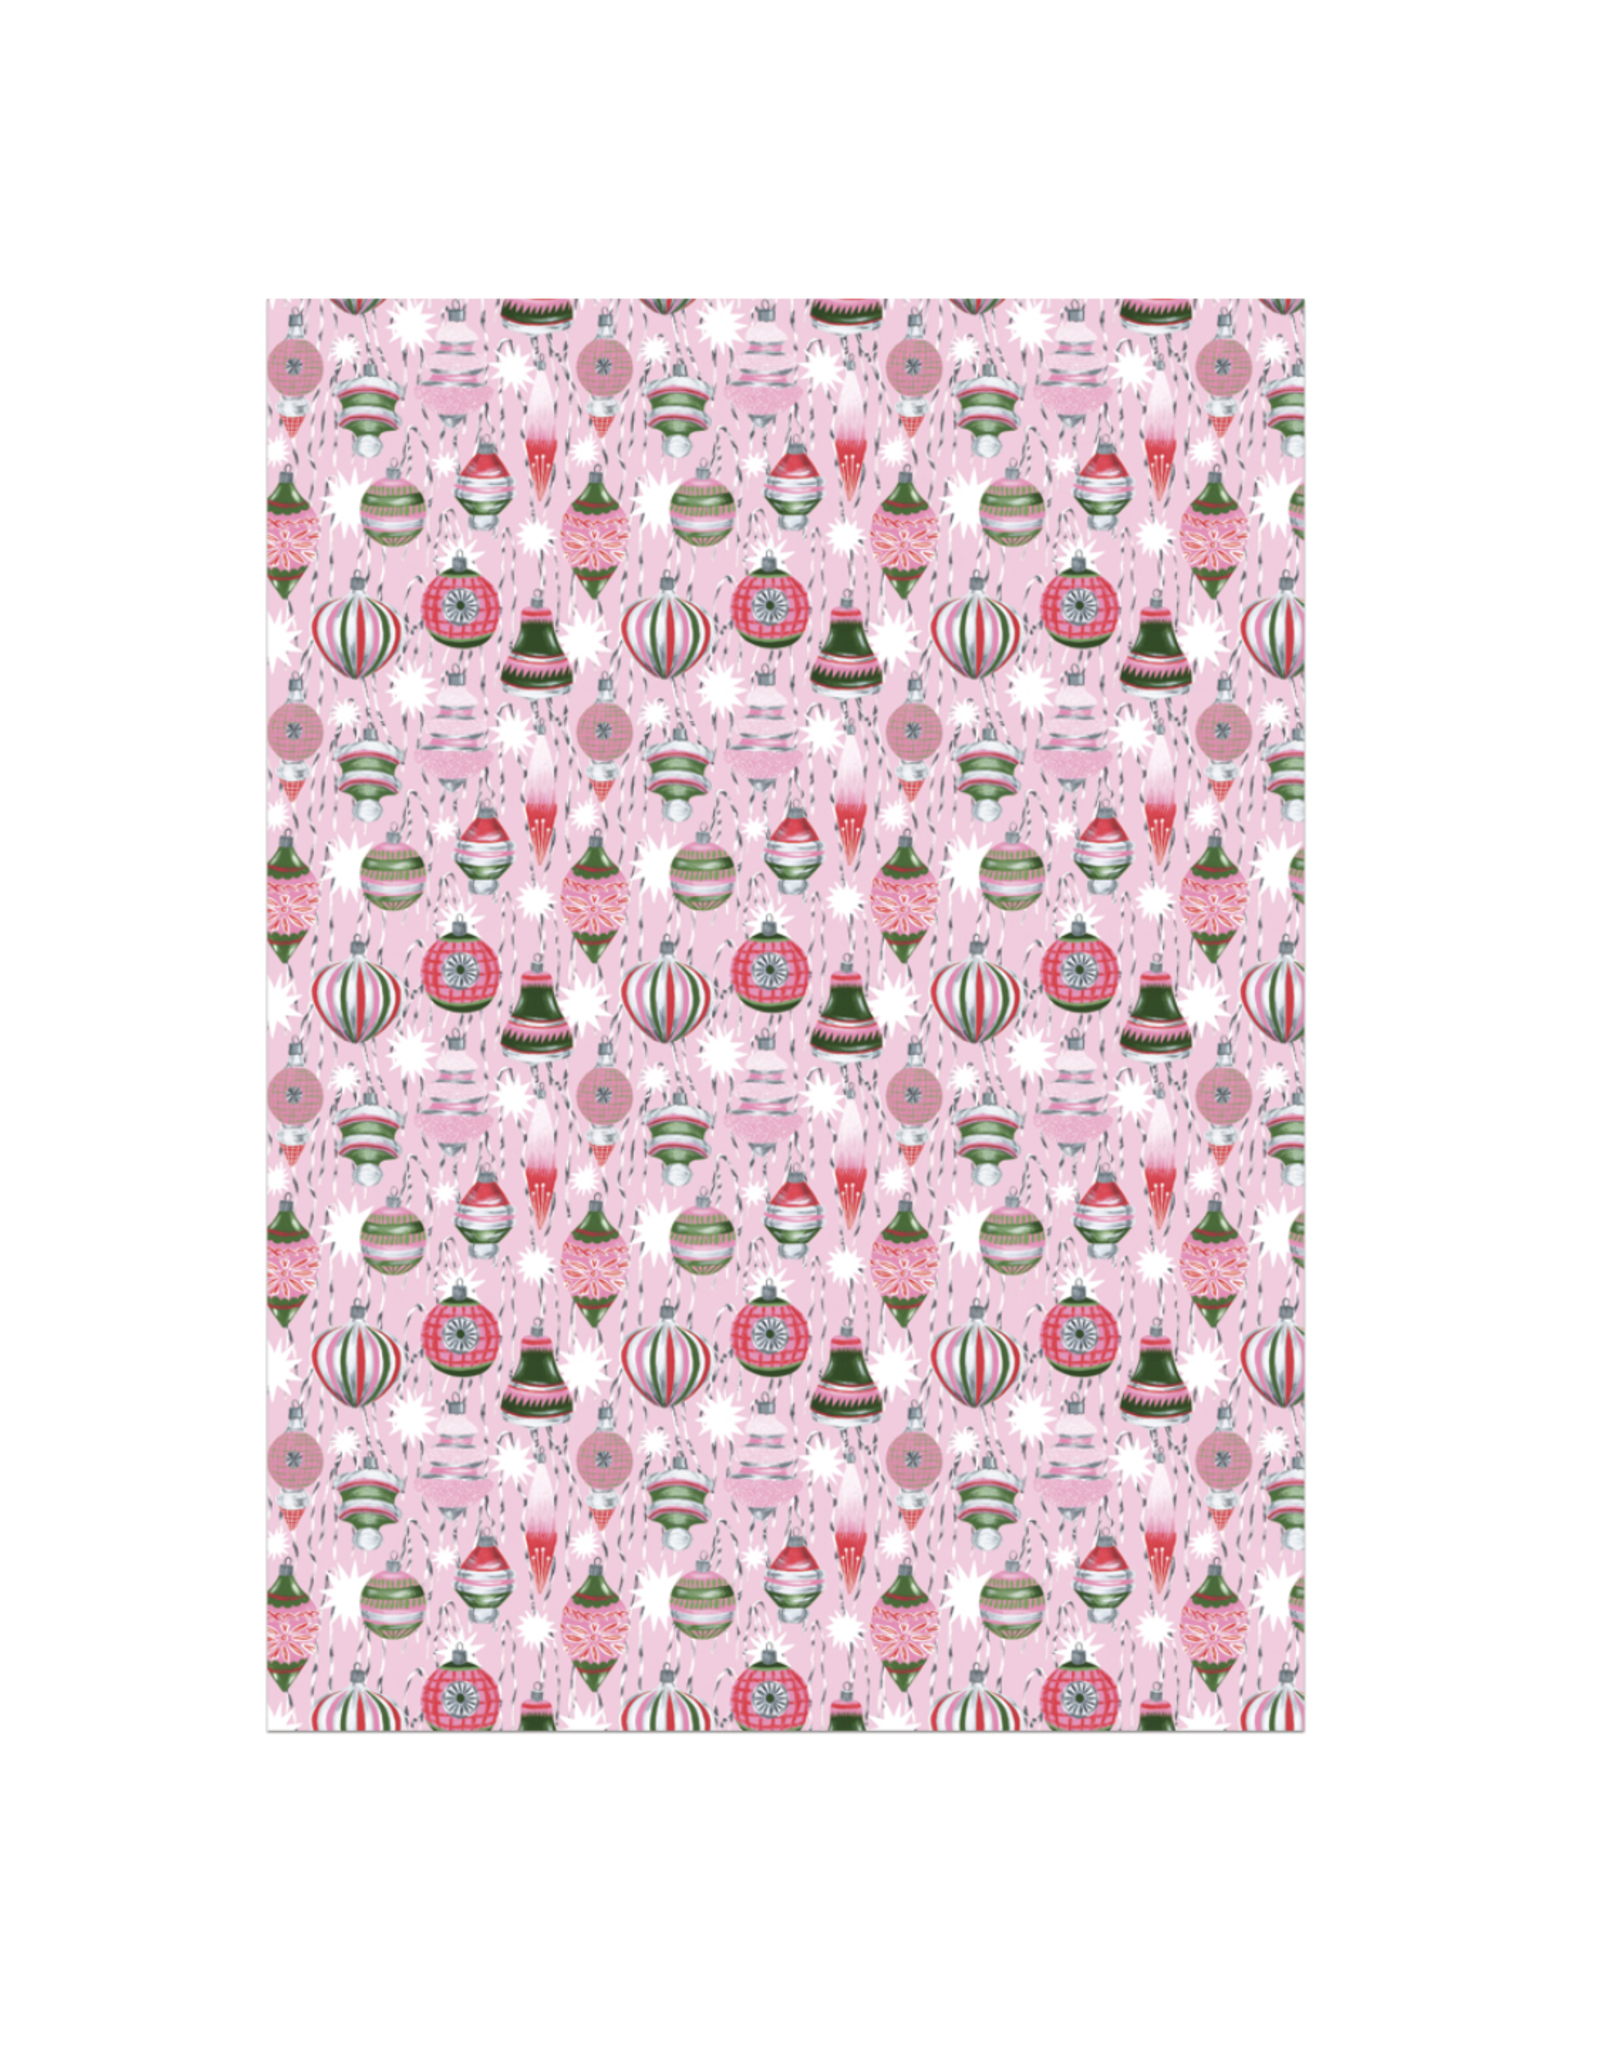 Retro Ornaments Wrapping Paper - Curbside Pick-Up Only